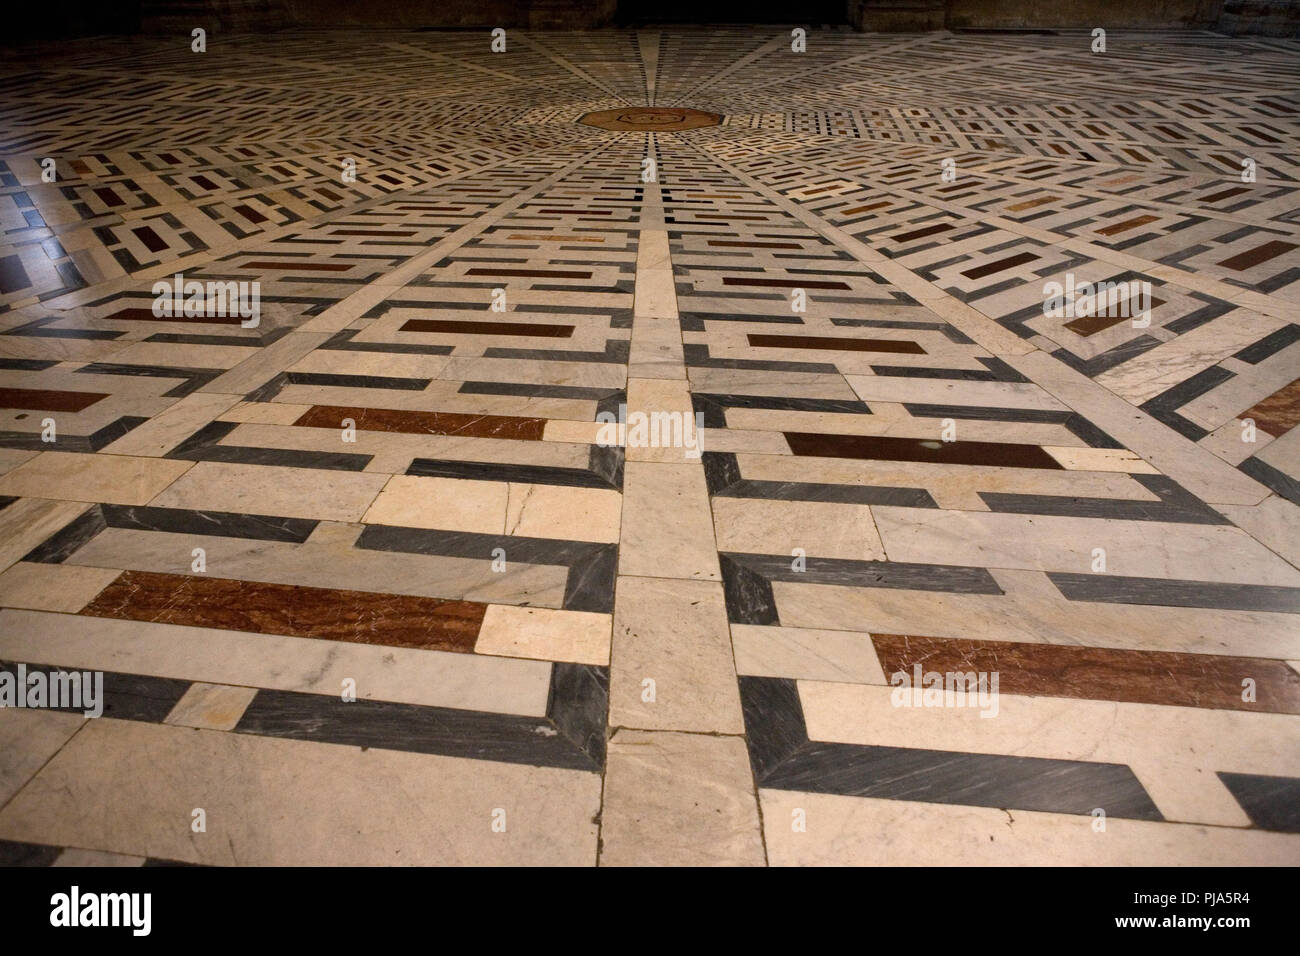 The interior of the Duomo, Florence, showing the marble floor of the nave Stock Photo